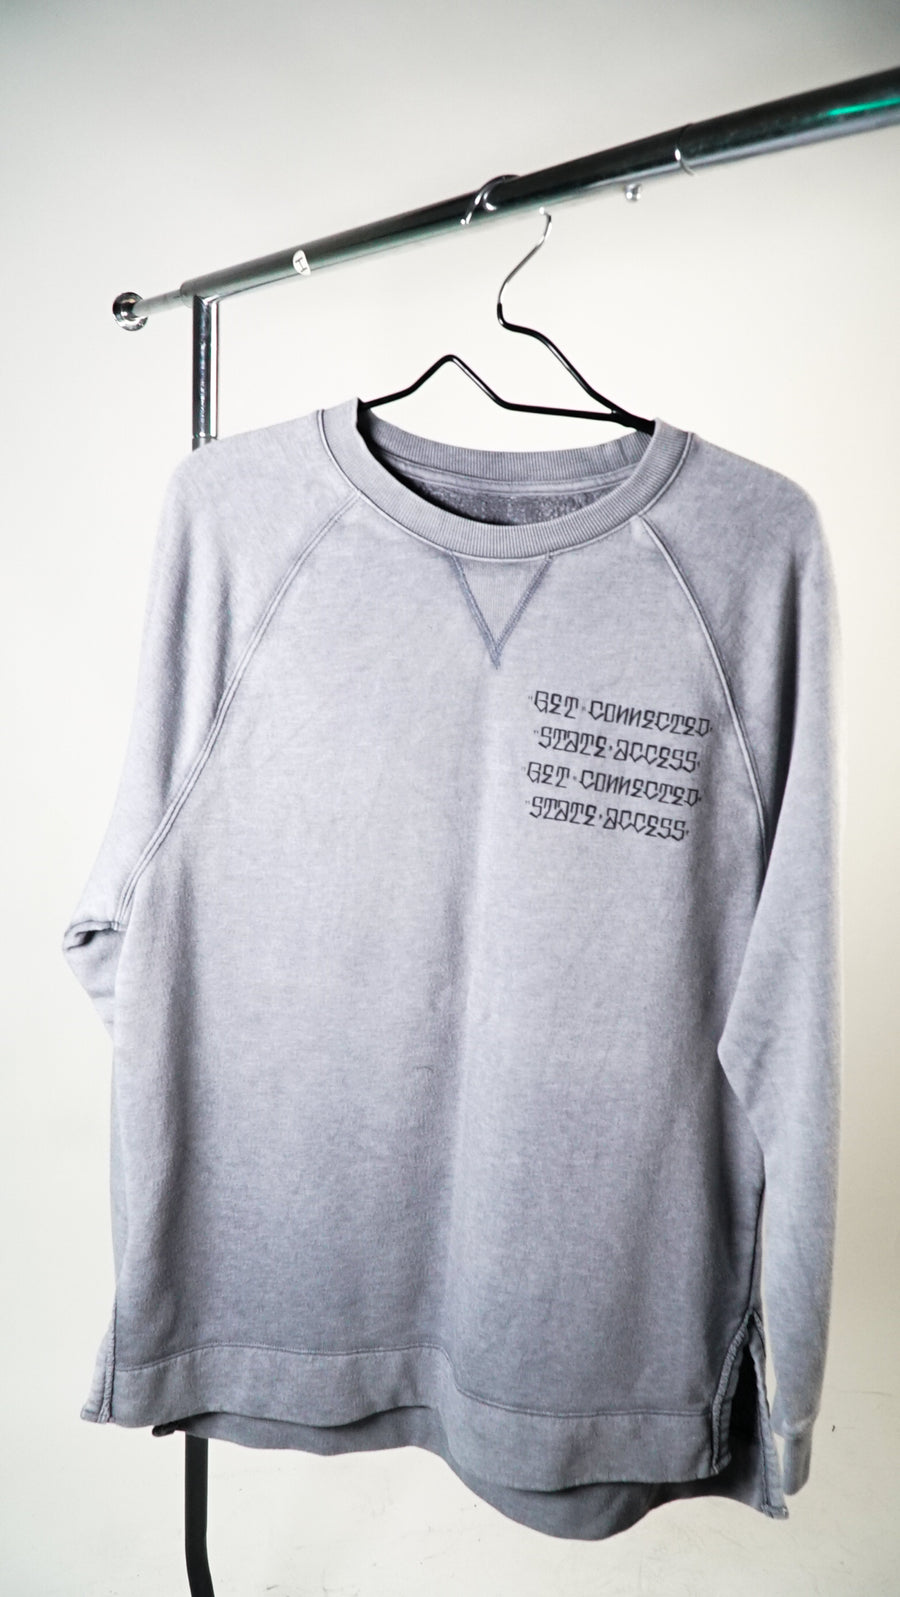 Get Connected State Access Crewneck